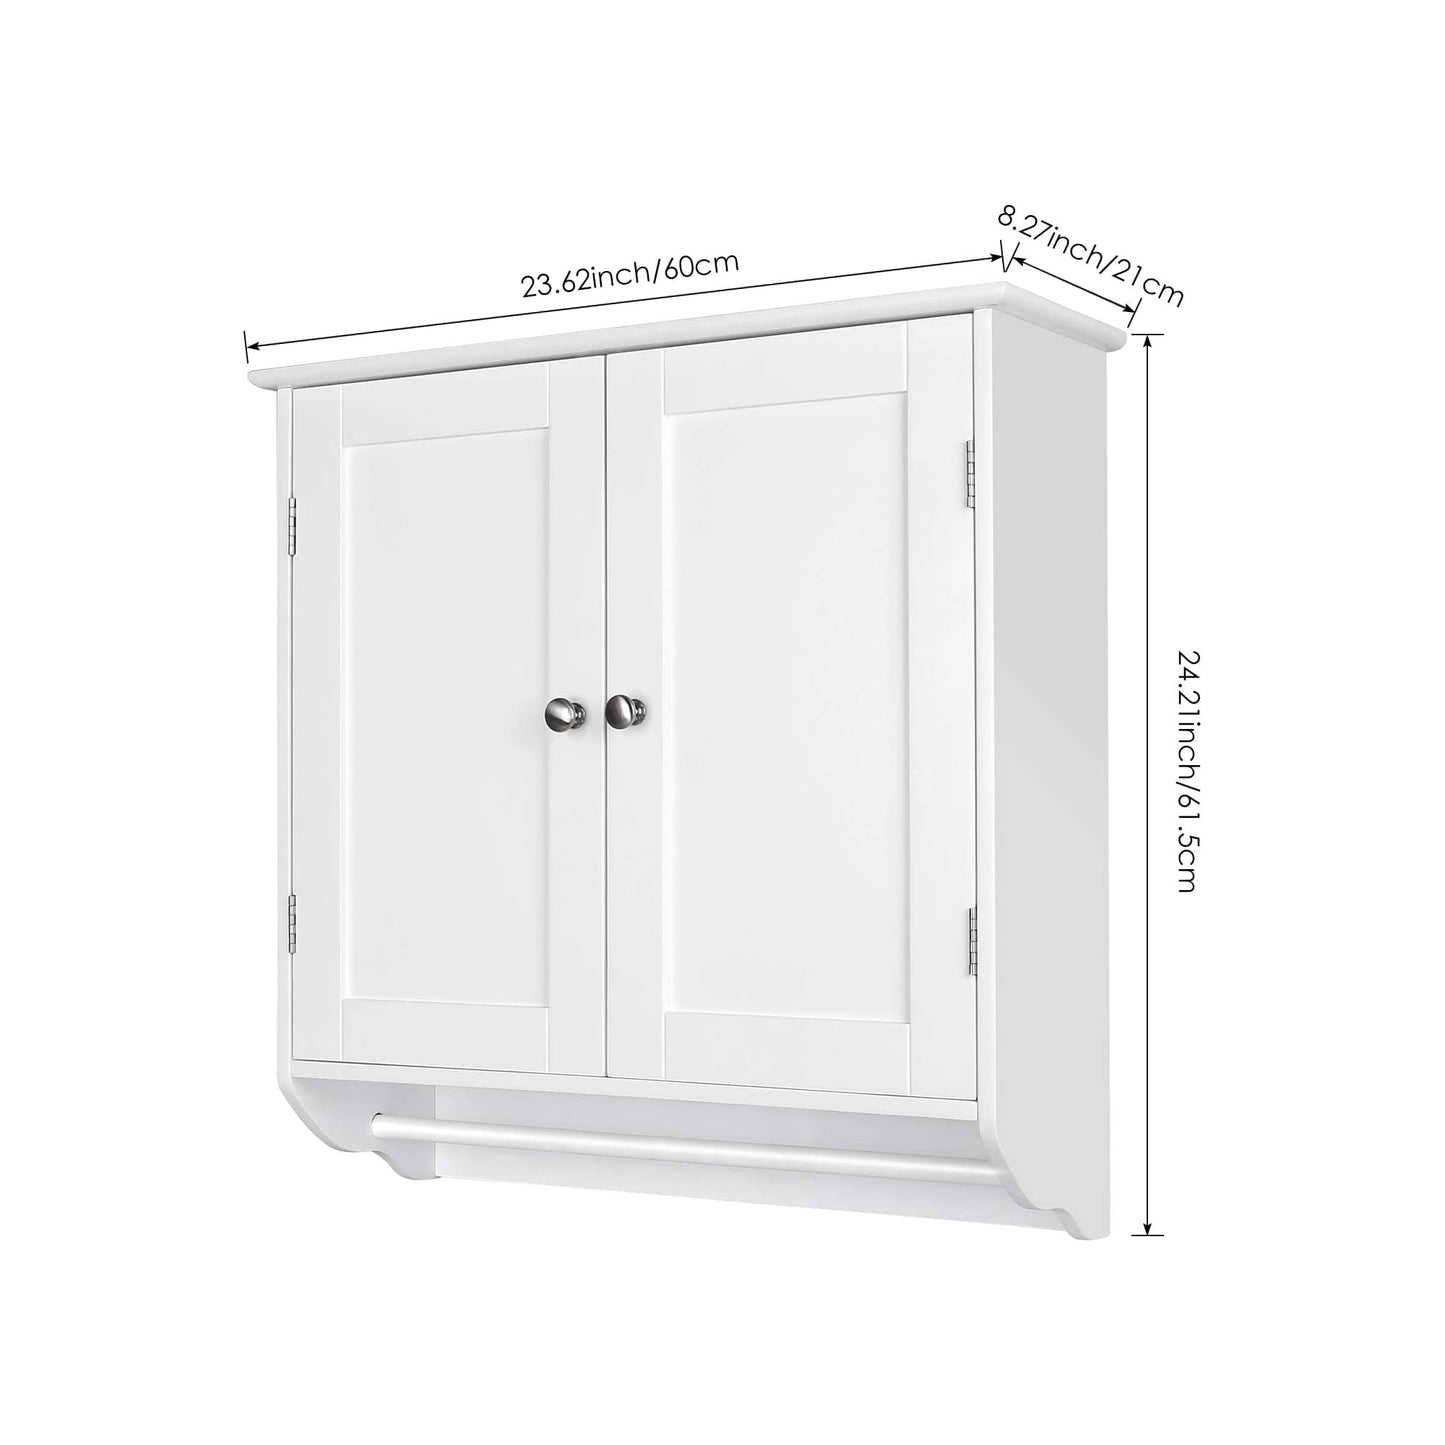 Homfa Bathroom Wall Cabinet, Over The Toilet Storage Cabinet with Double Door Cupboard and Adjustable Shelf and Towels Bar, White